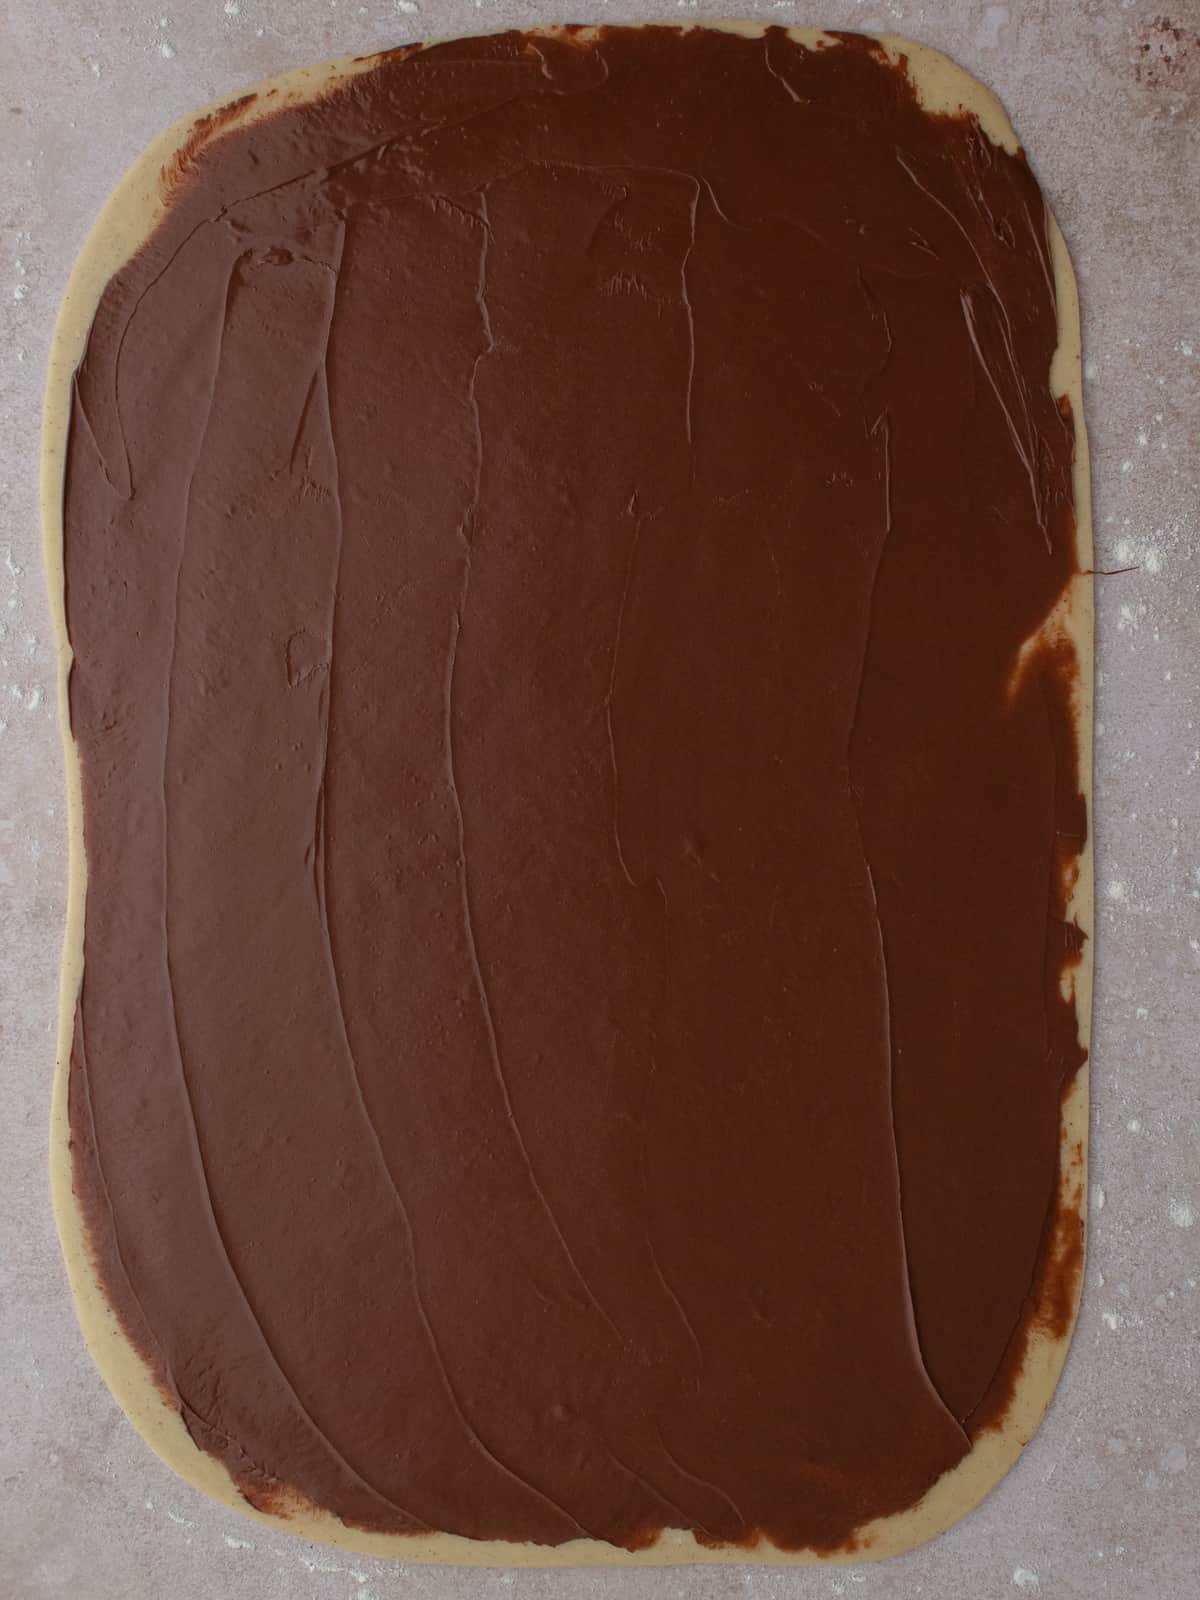 Dough rolled out to a rectangle with a layer of Nutella on top